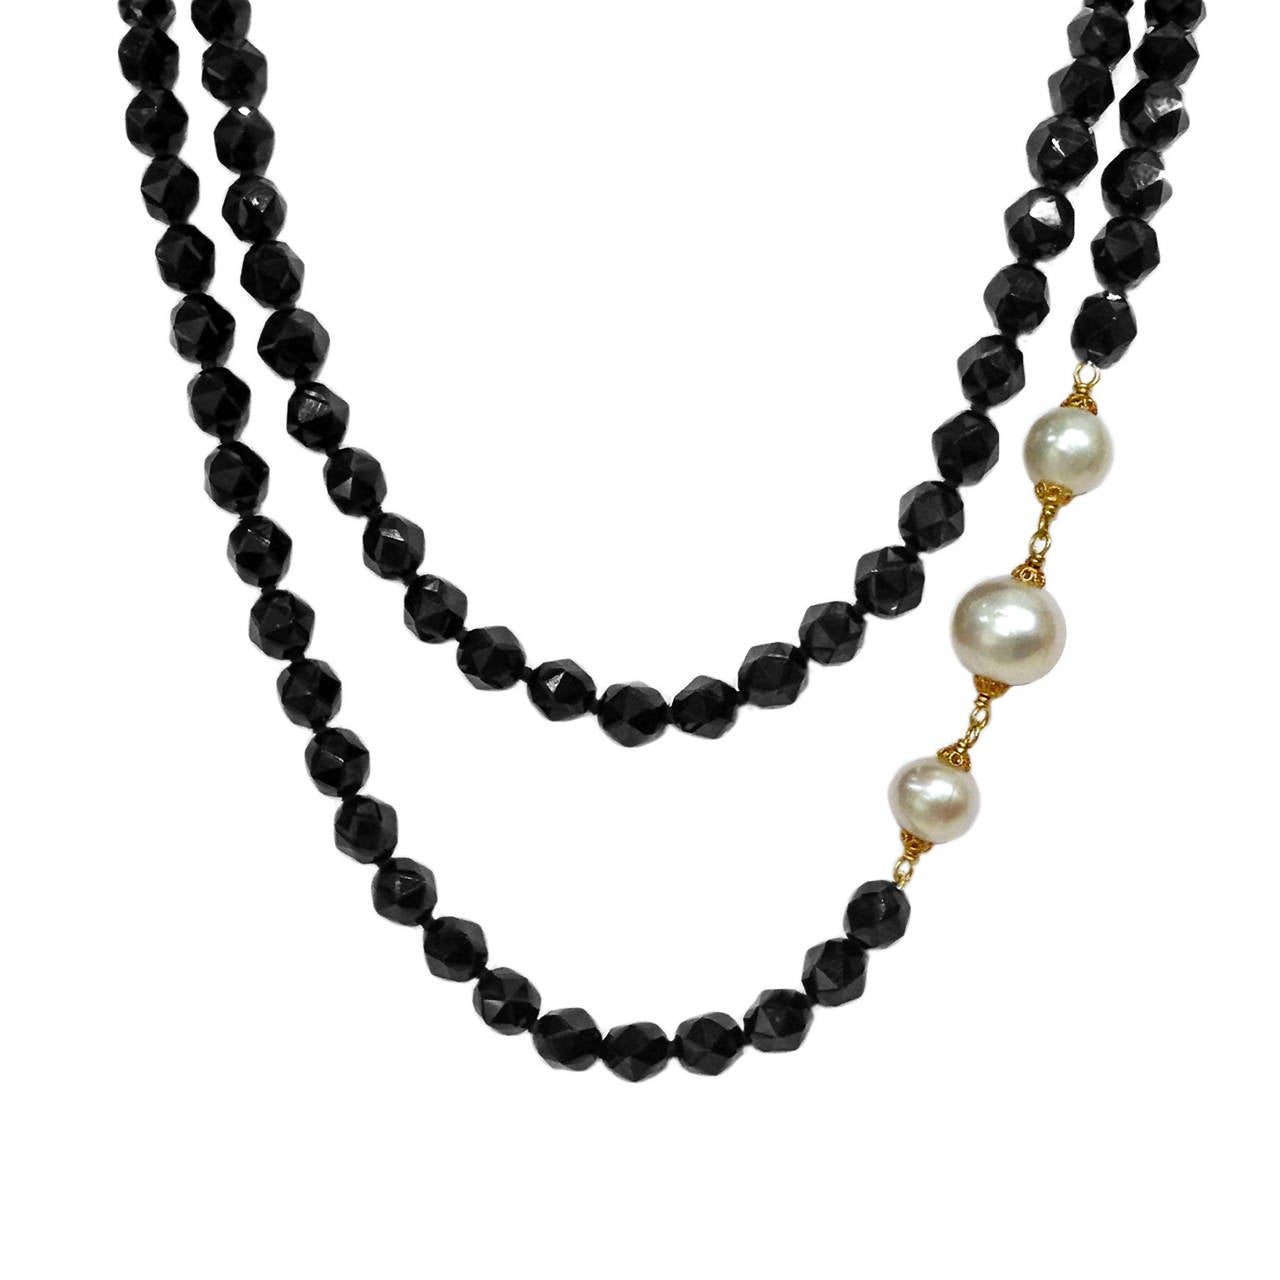 One of a Kind 40" Faceted Spinel White Pearl 22k Gold Necklace